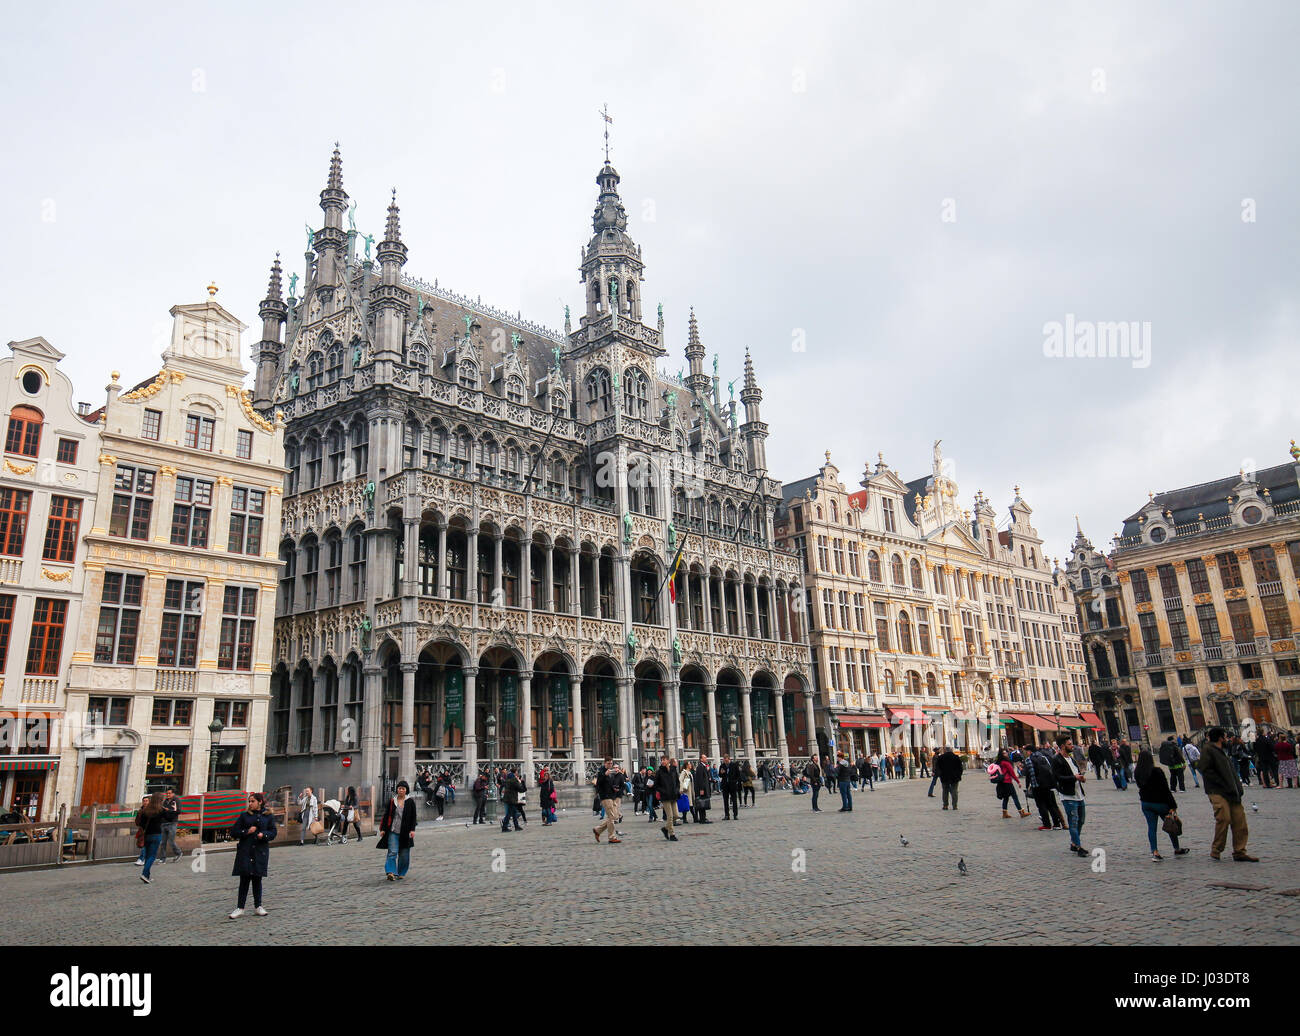 The Museum of the City of Brussels located in the Maison du Roi (King's House) or Broodhuis (Breadhouse), at the Grand Place in the center of Brussels Stock Photo